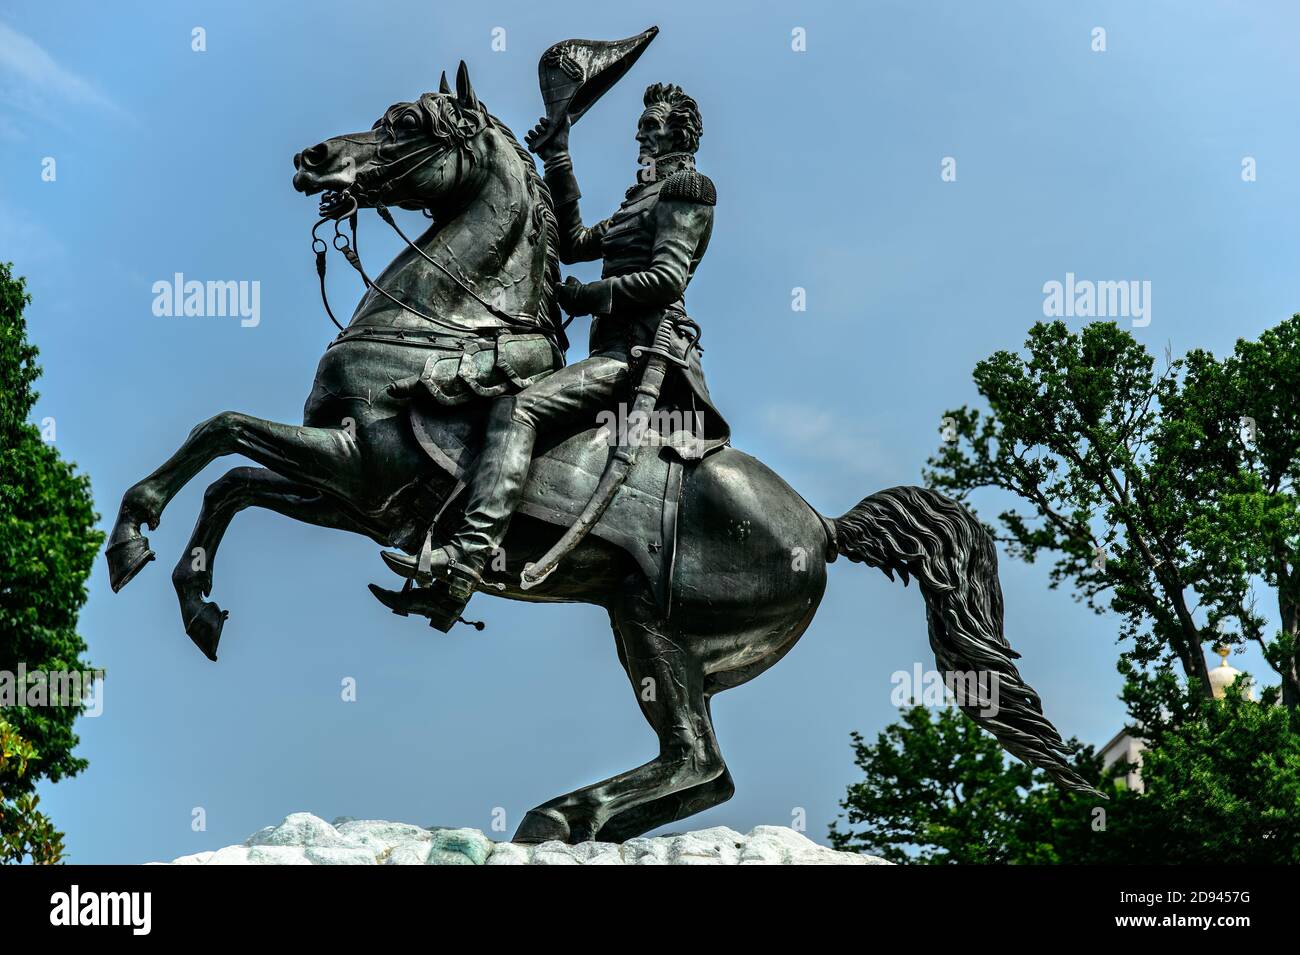 Bronze Statue of General Andrew Jackson in Lafayette Square located in  the President's Park in Washington, D.C. Stock Photo